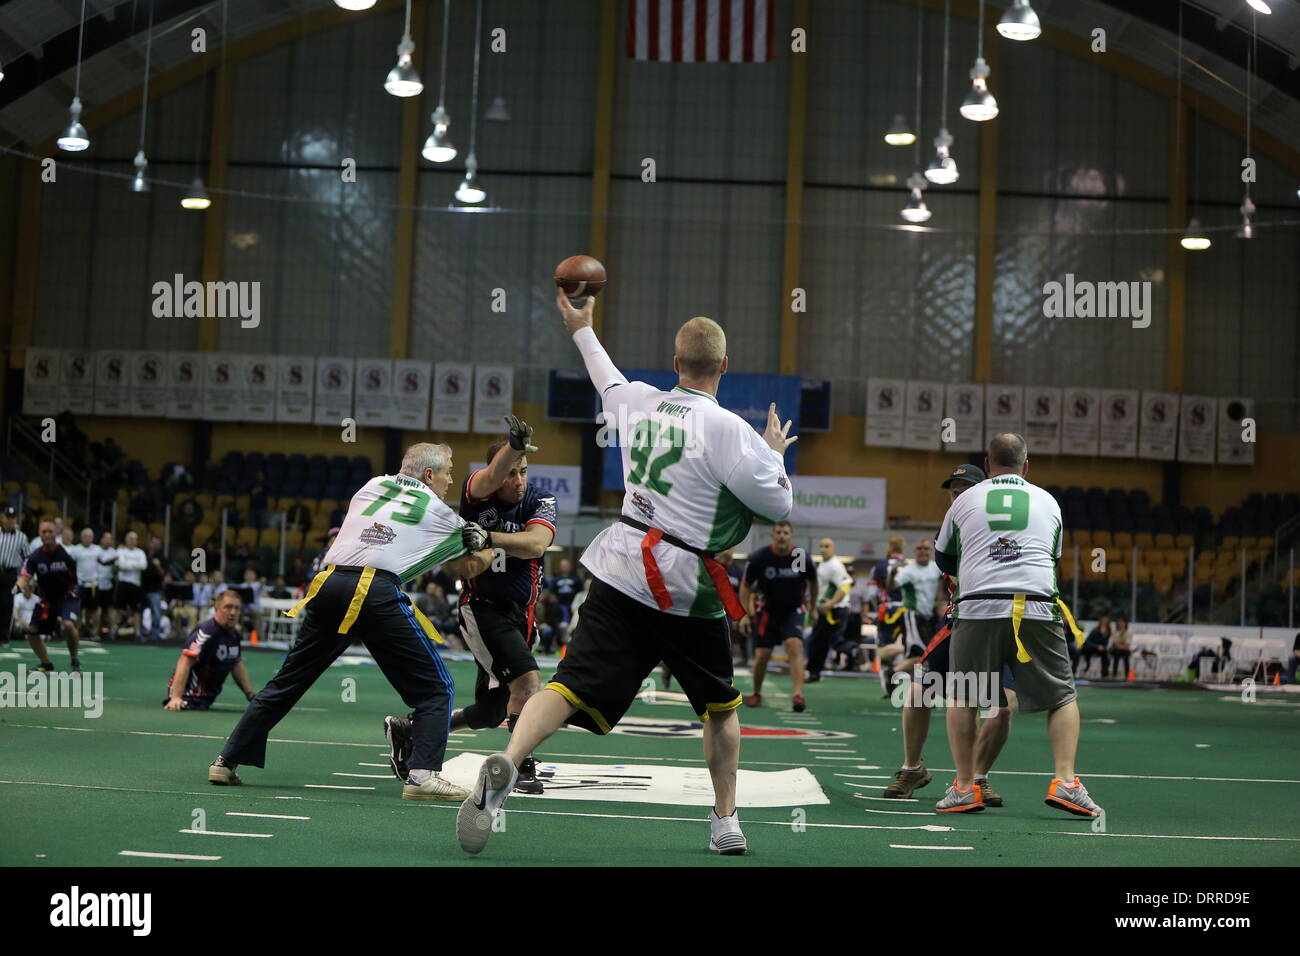 West Orange, New Jersey, USA. 29th Jan, 2014. Ex-NFL quarterback CHRIS SIMMS throws a pass for the First Responders in the second half of the charity game against the Wounded Warriors Amputee Football Team at Codey Arena. Credit:  Michael Cummo/ZUMA Wire/ZUMAPRESS.com/Alamy Live News Stock Photo